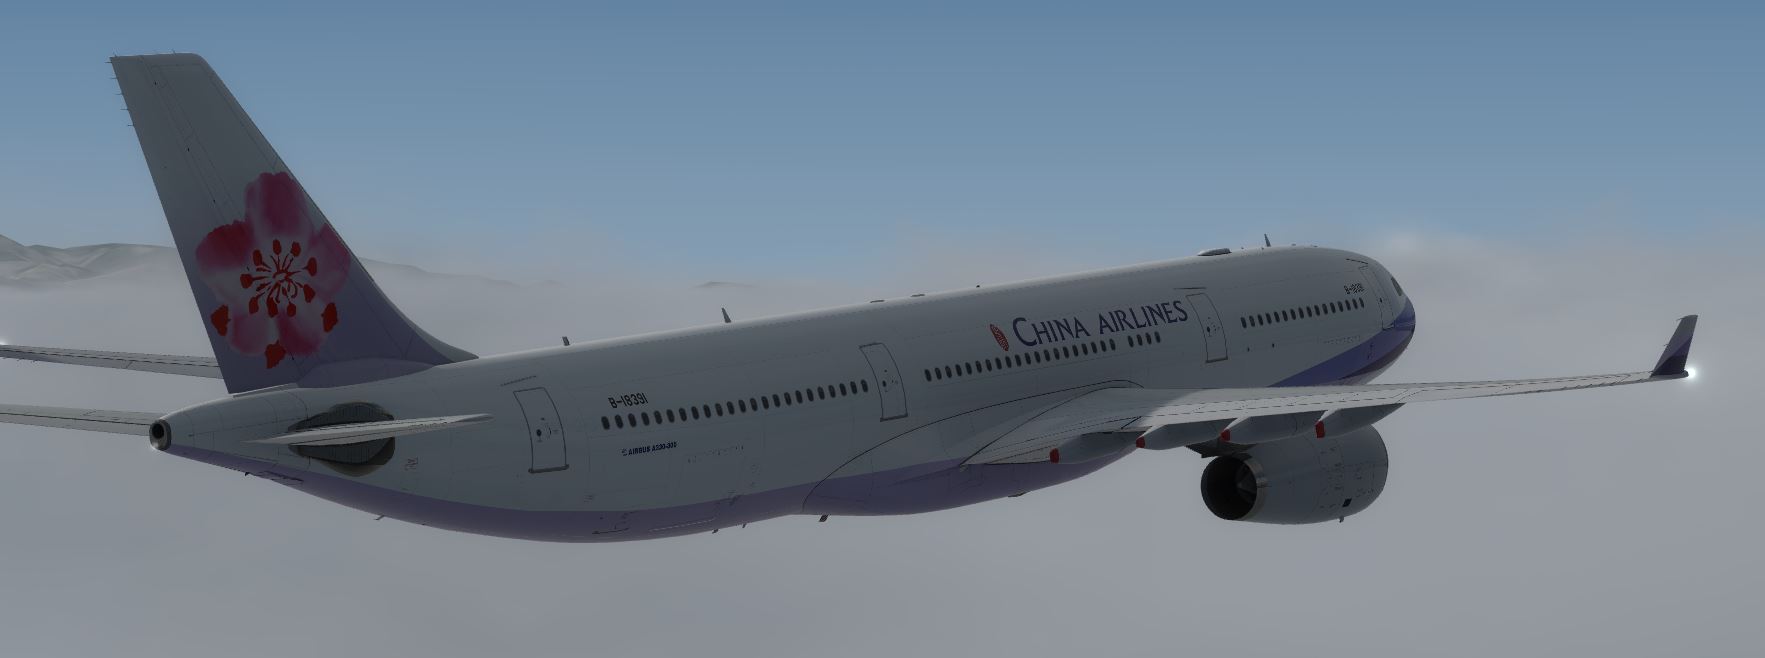 AS A330 ChinaAirline-8864 